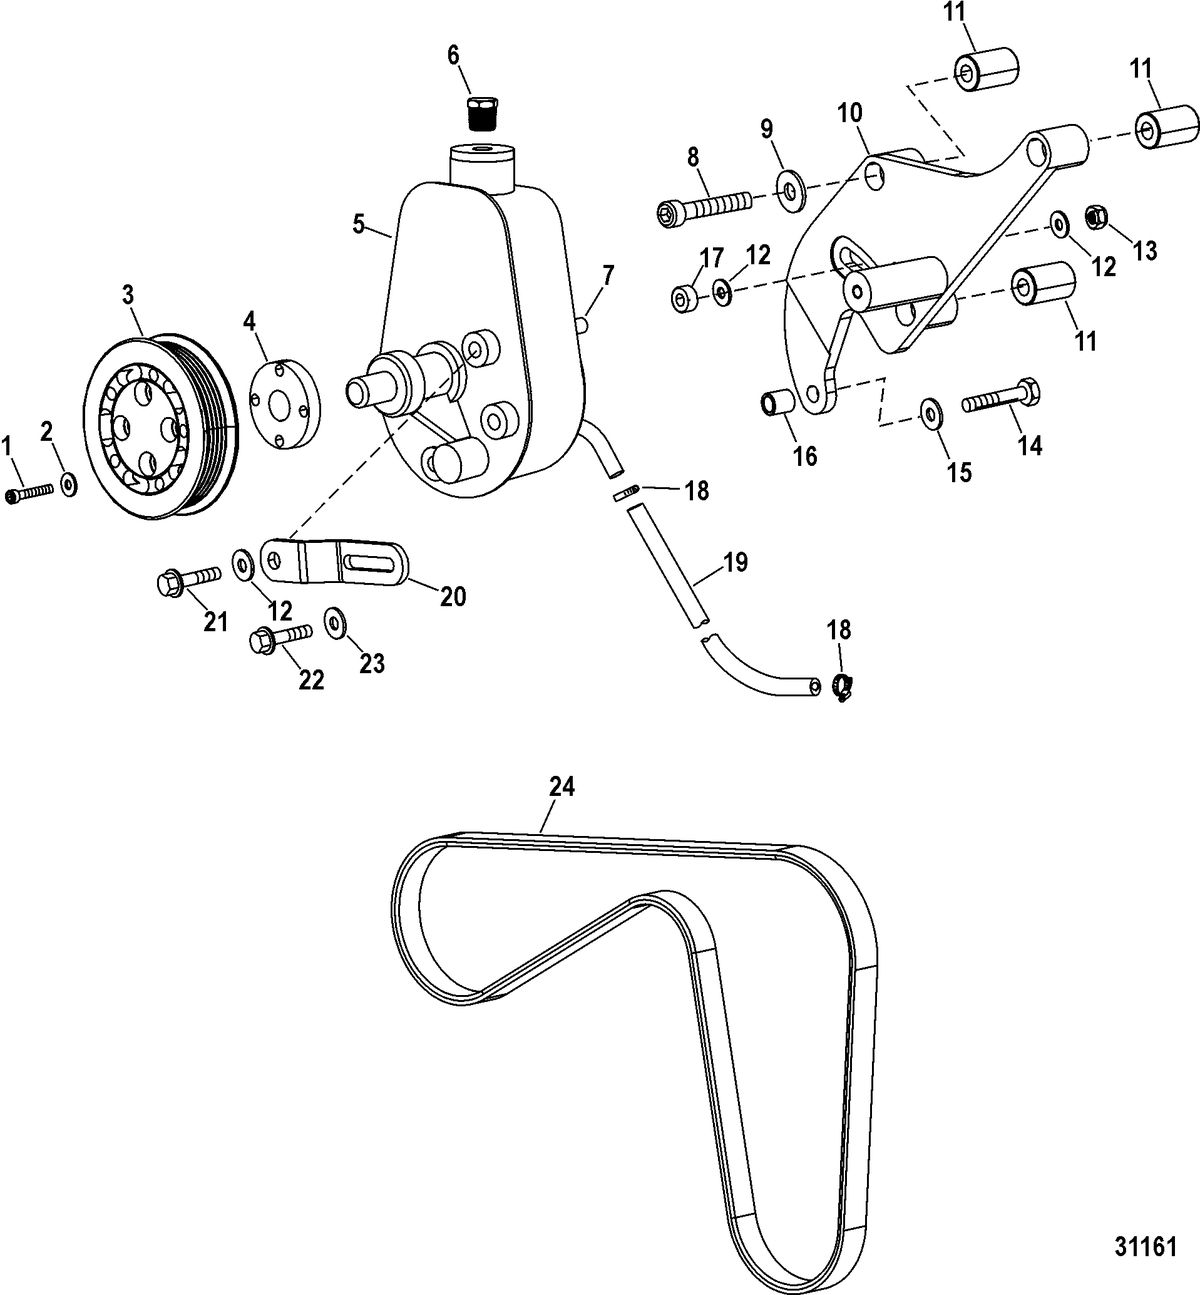 RACE STERNDRIVE 850 SCI Power-Assisted Steering Components(Design II)